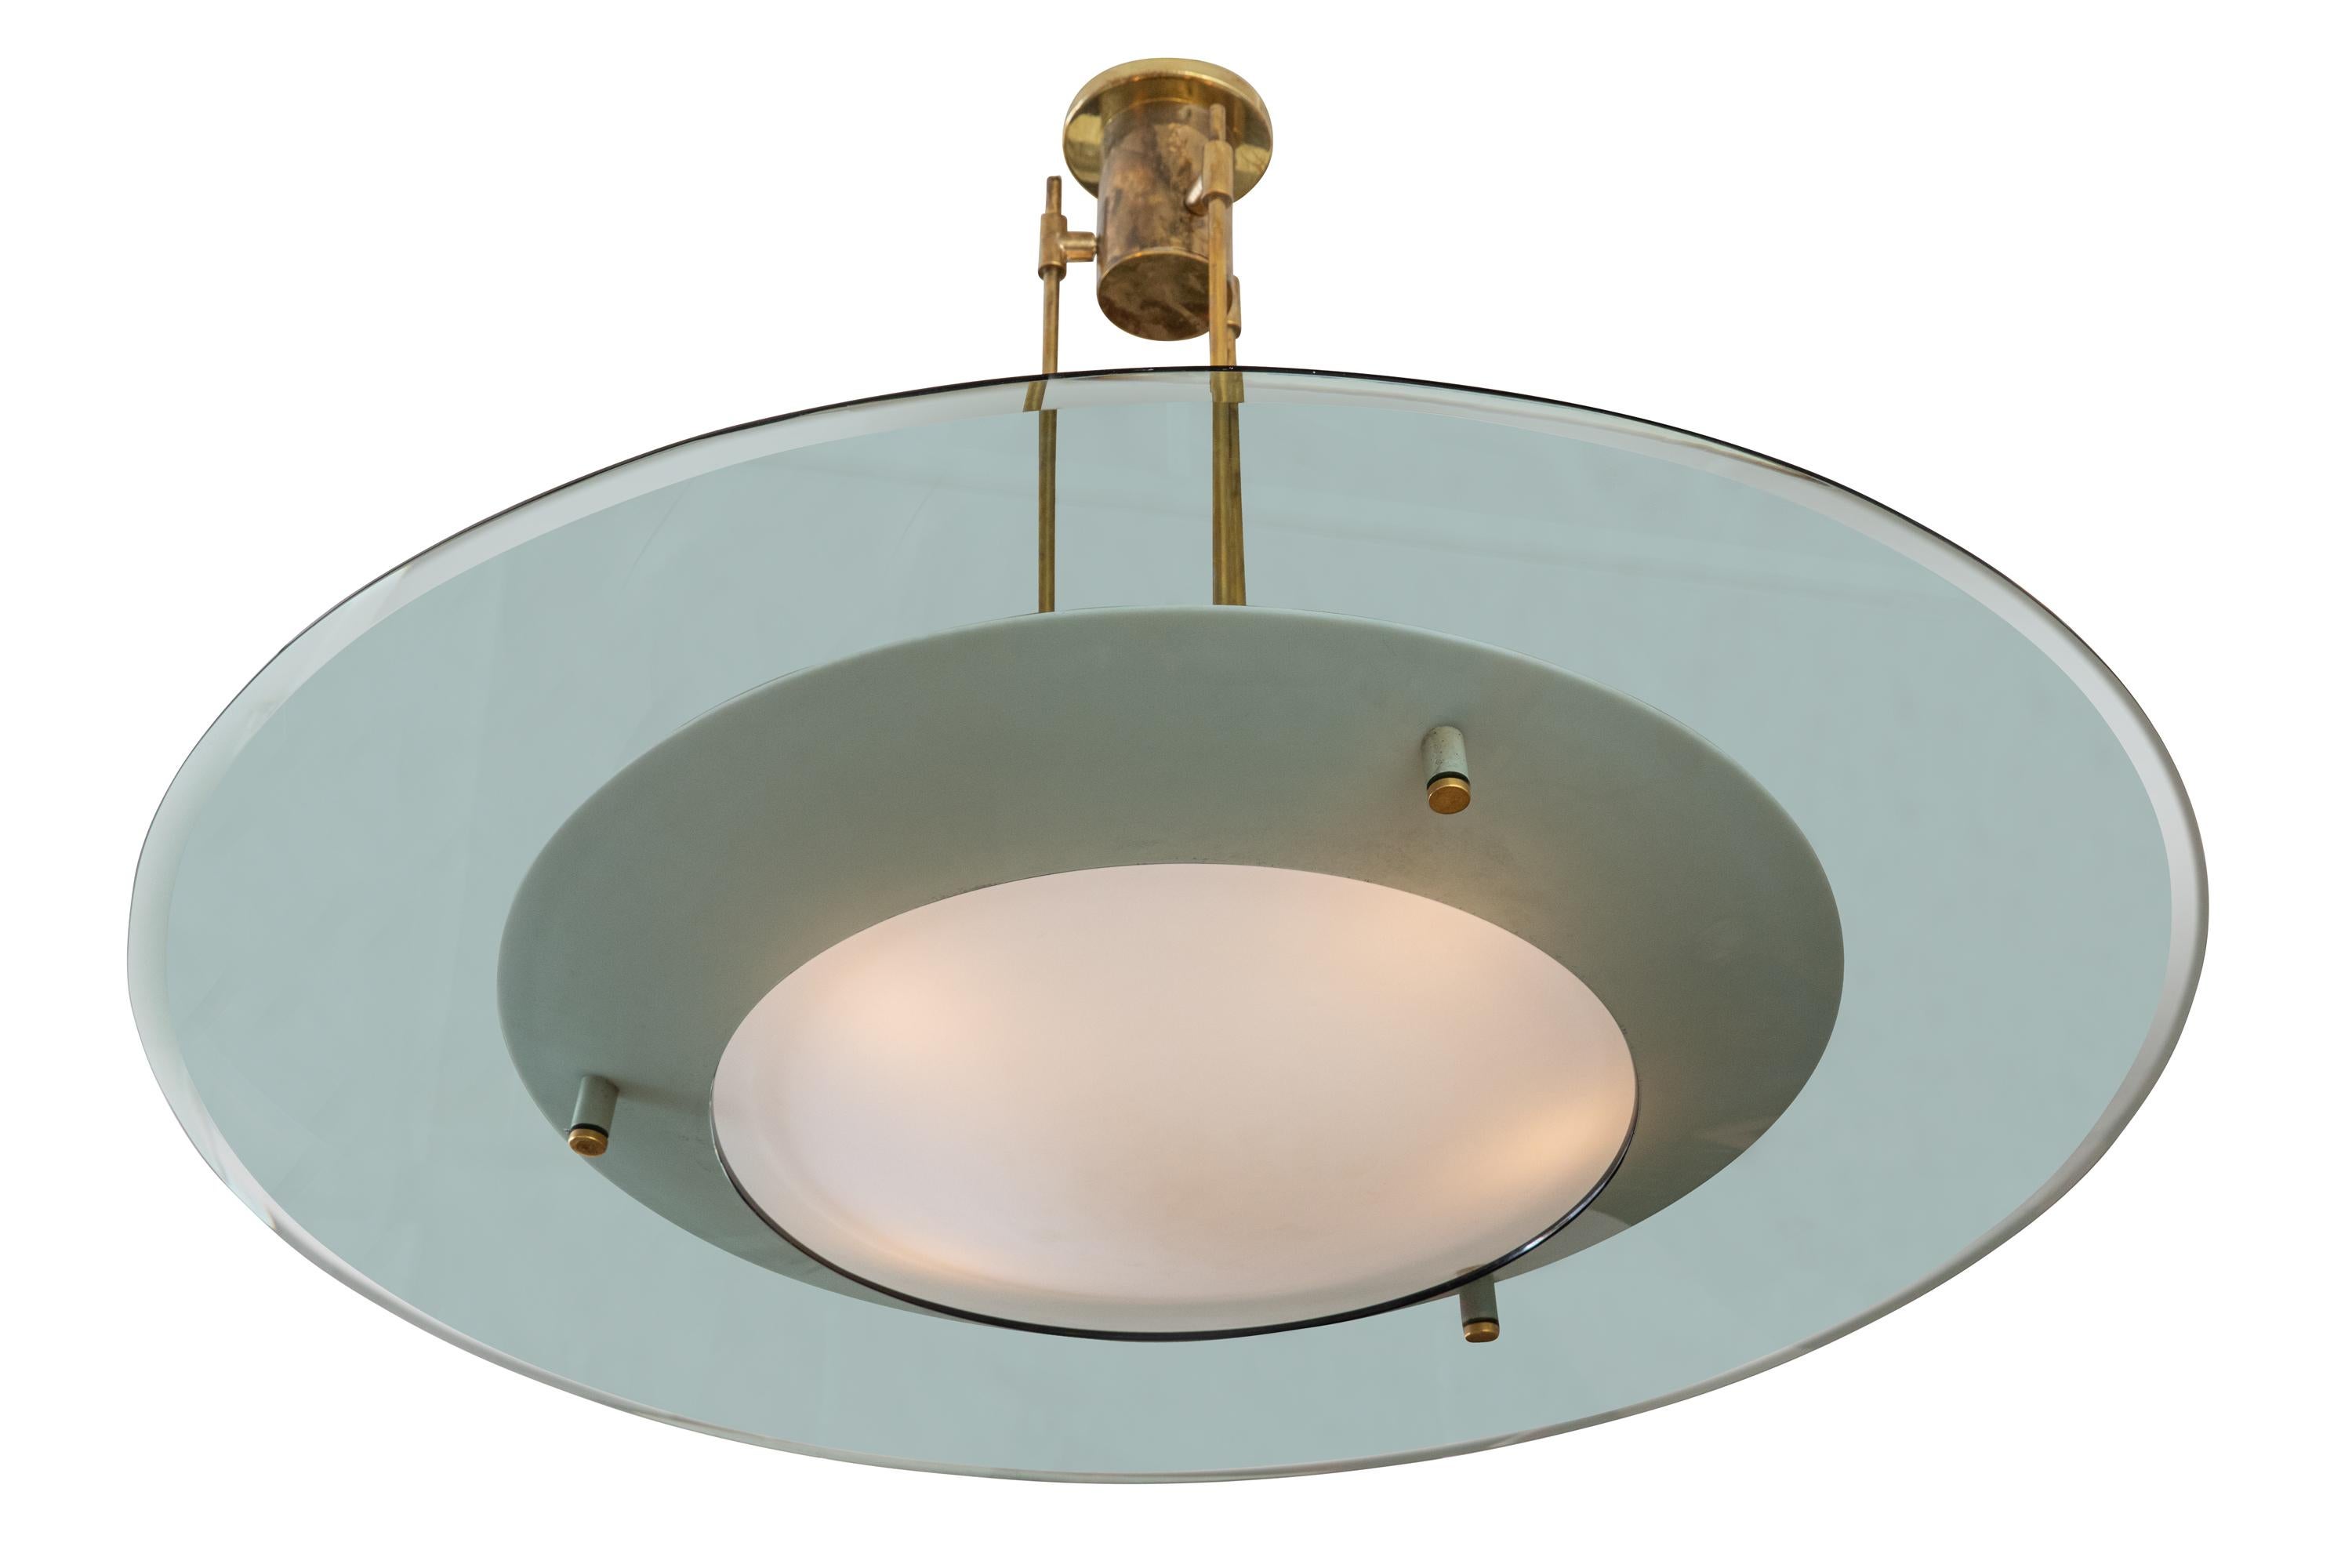 Fontana Arte chandelier model 2097 designed by Max Ingrand. It features a gray concave beveled glass disc with a conical frosted glass shade in the center. The frame is solid brass.